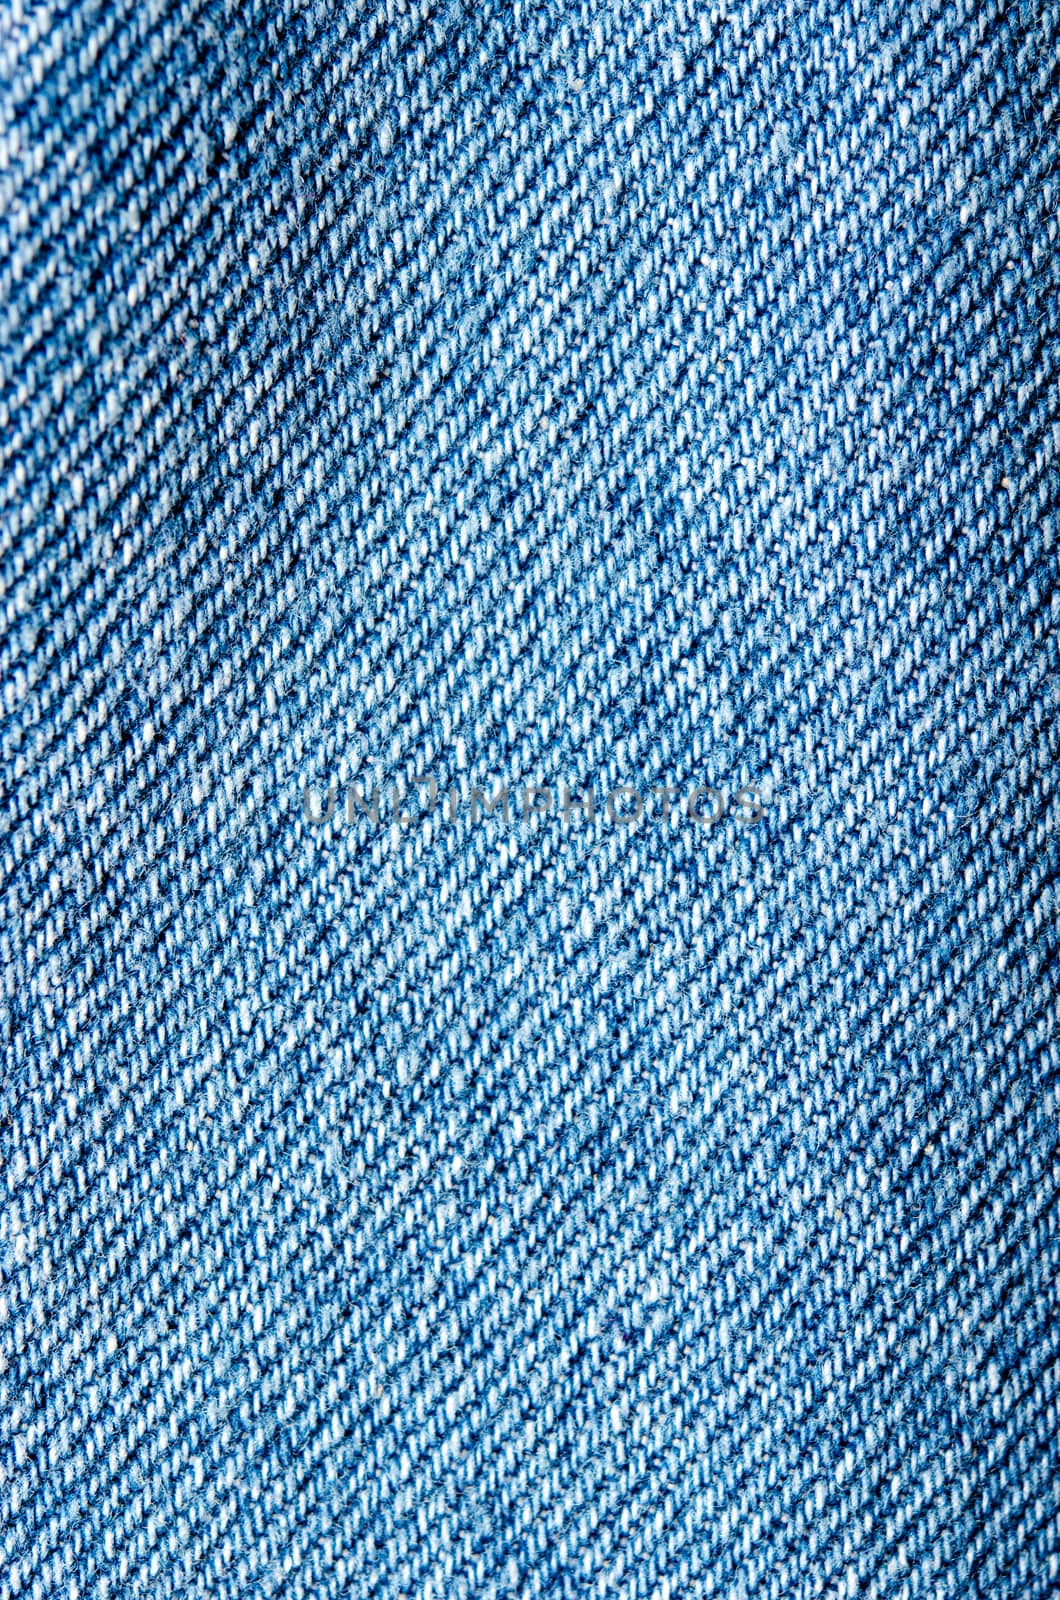 jeans texture by aoo3771